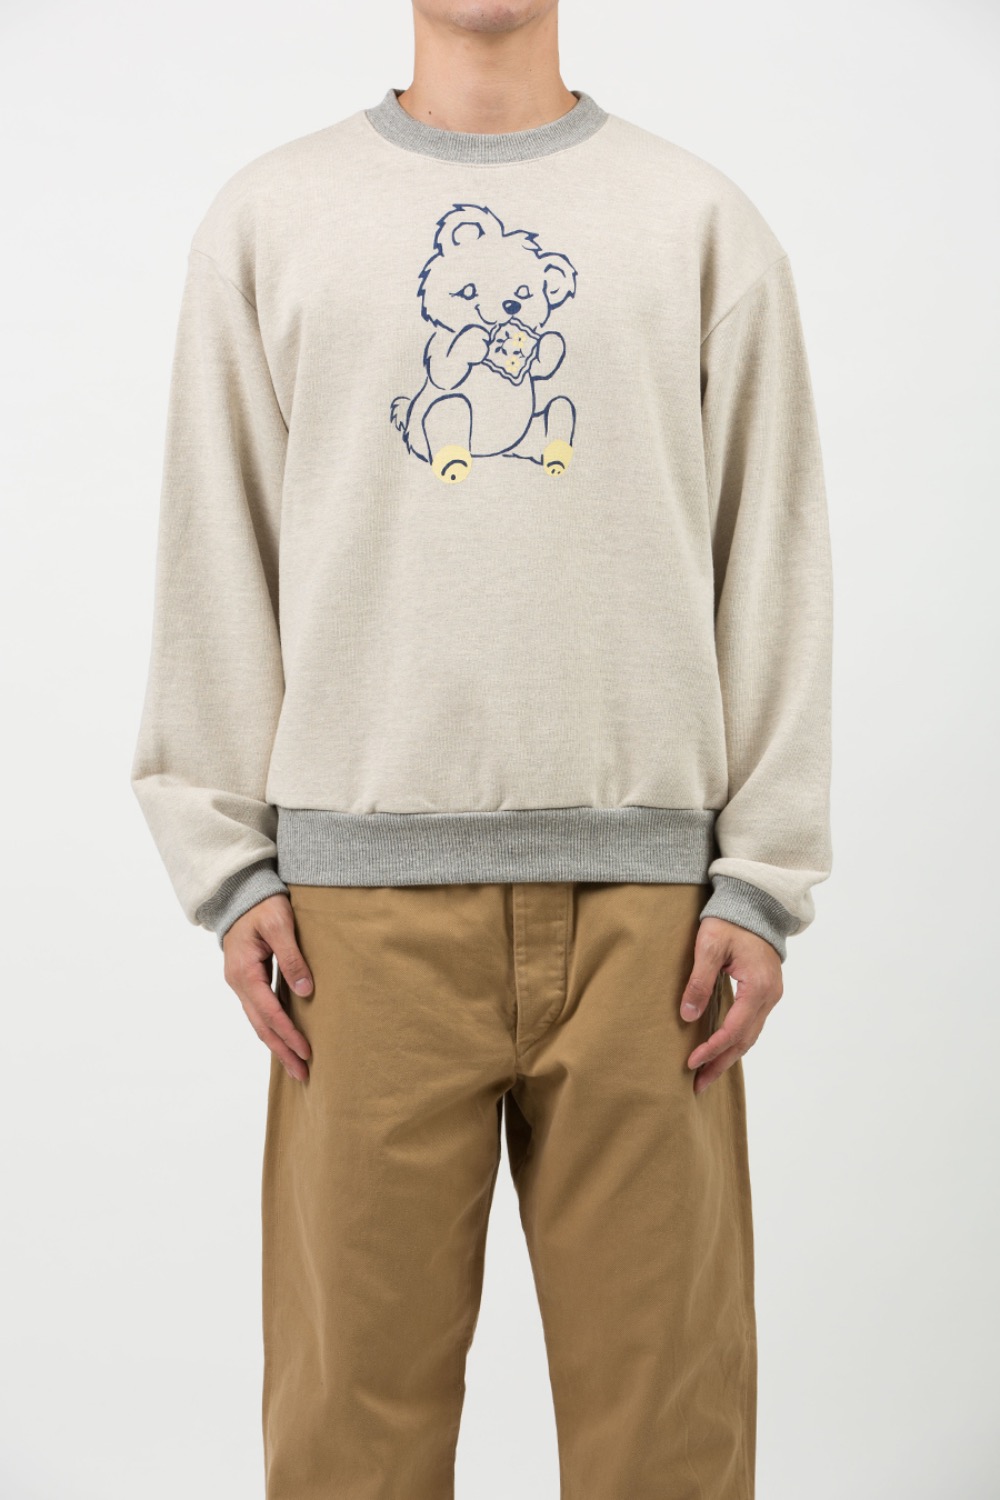 (23FW) SWT KNIT CREW SWT (PECKISH LITTLE BEAR) NATURAL/GREY